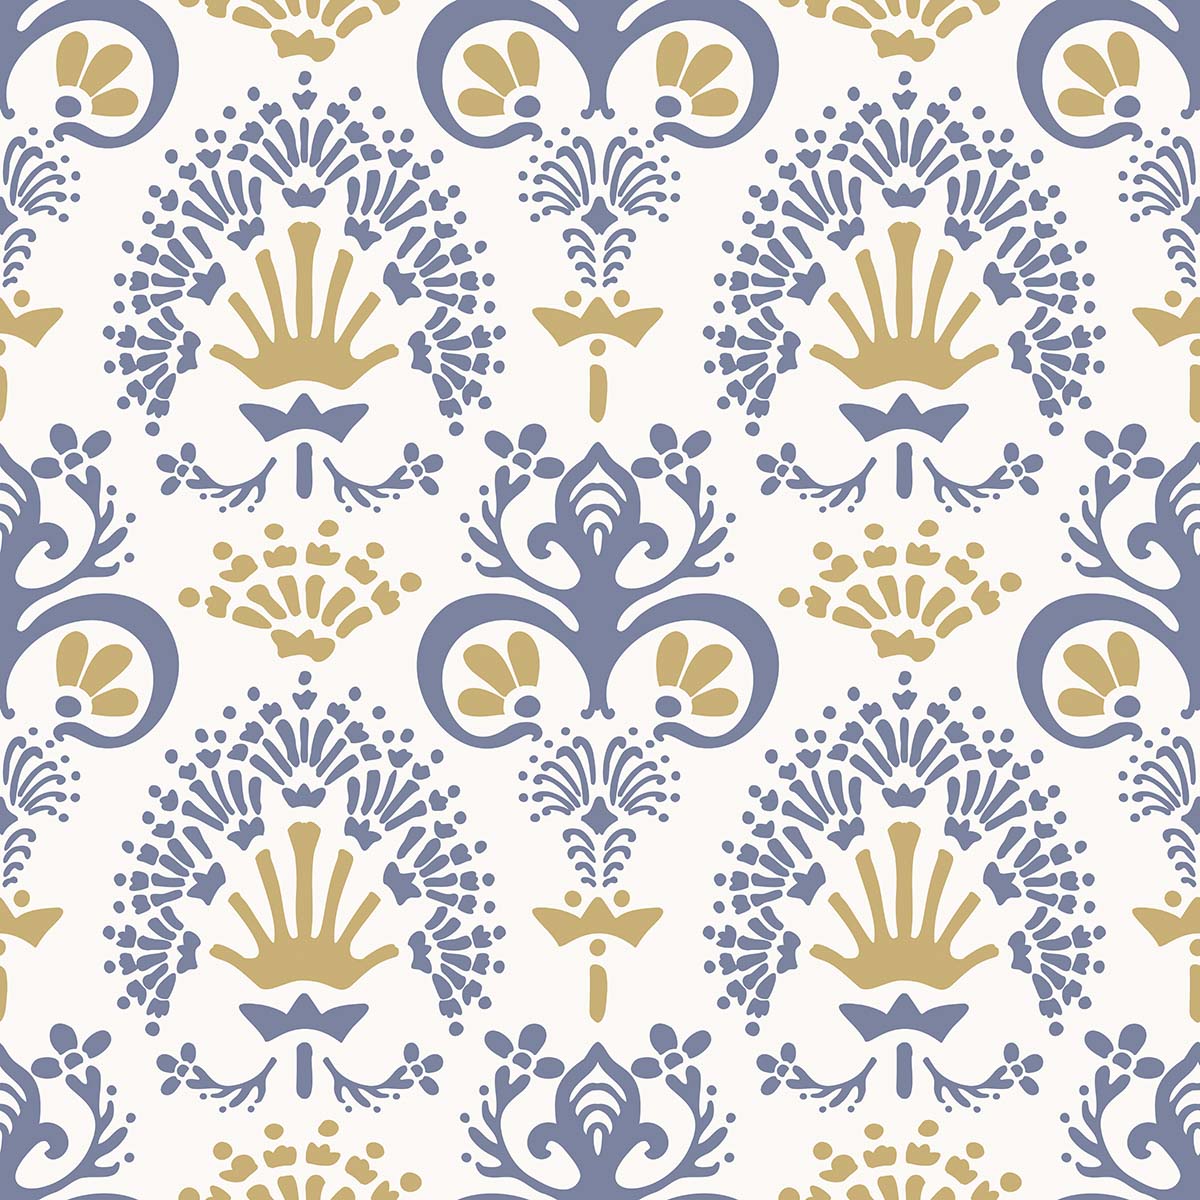 A pattern of blue and yellow flowers